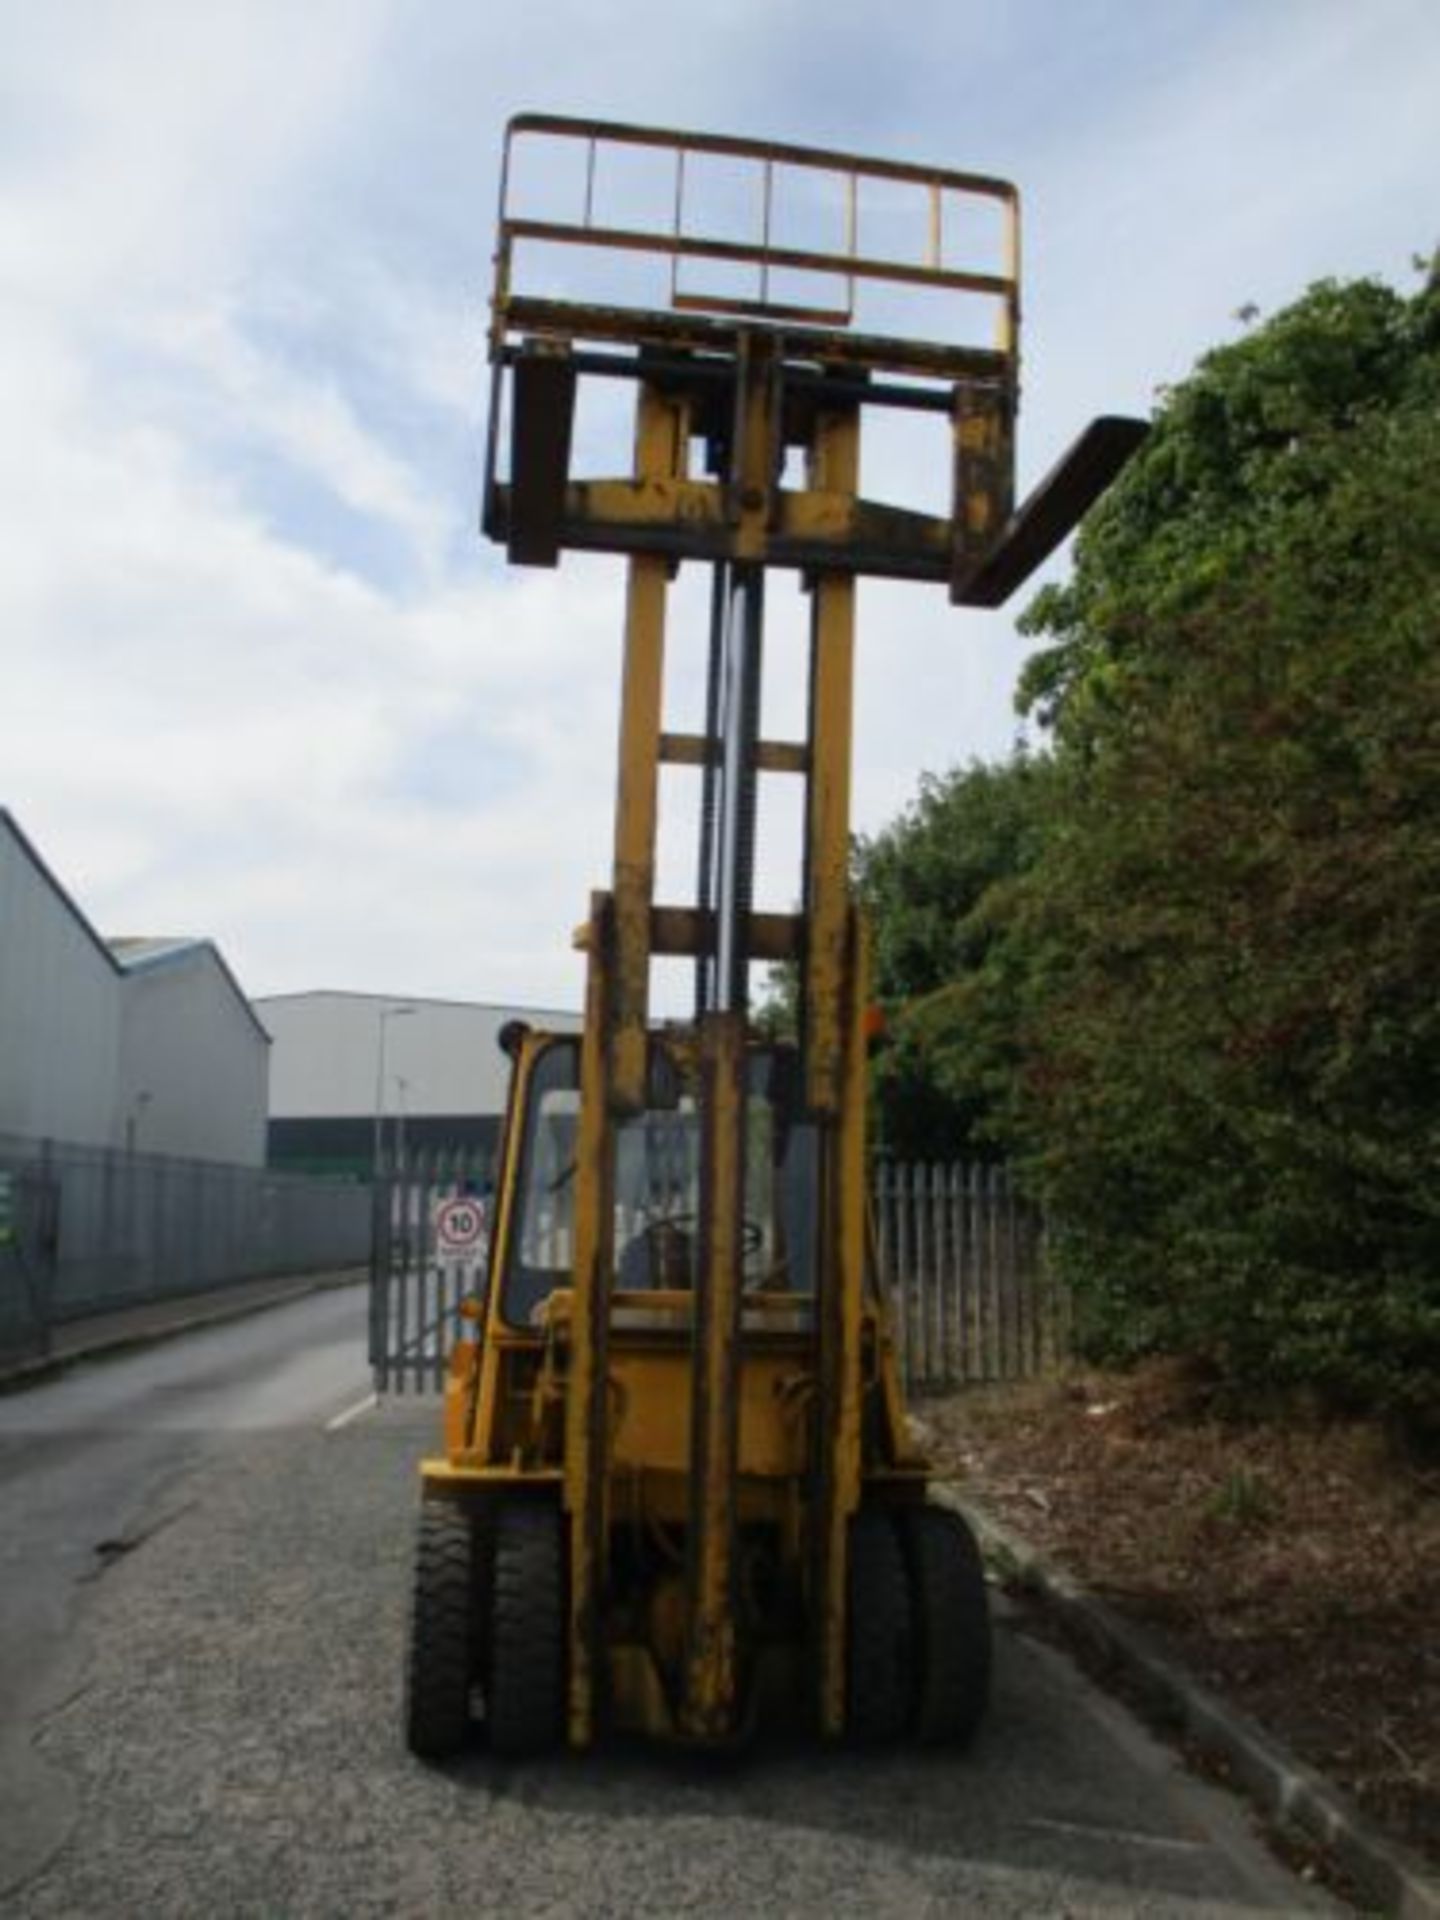 CLIMAX DA50 FORK LIFT FORKLIFT TRUCK STACKER 5 TON LIFT 6 7 8 10 DELIVERY - Image 6 of 12